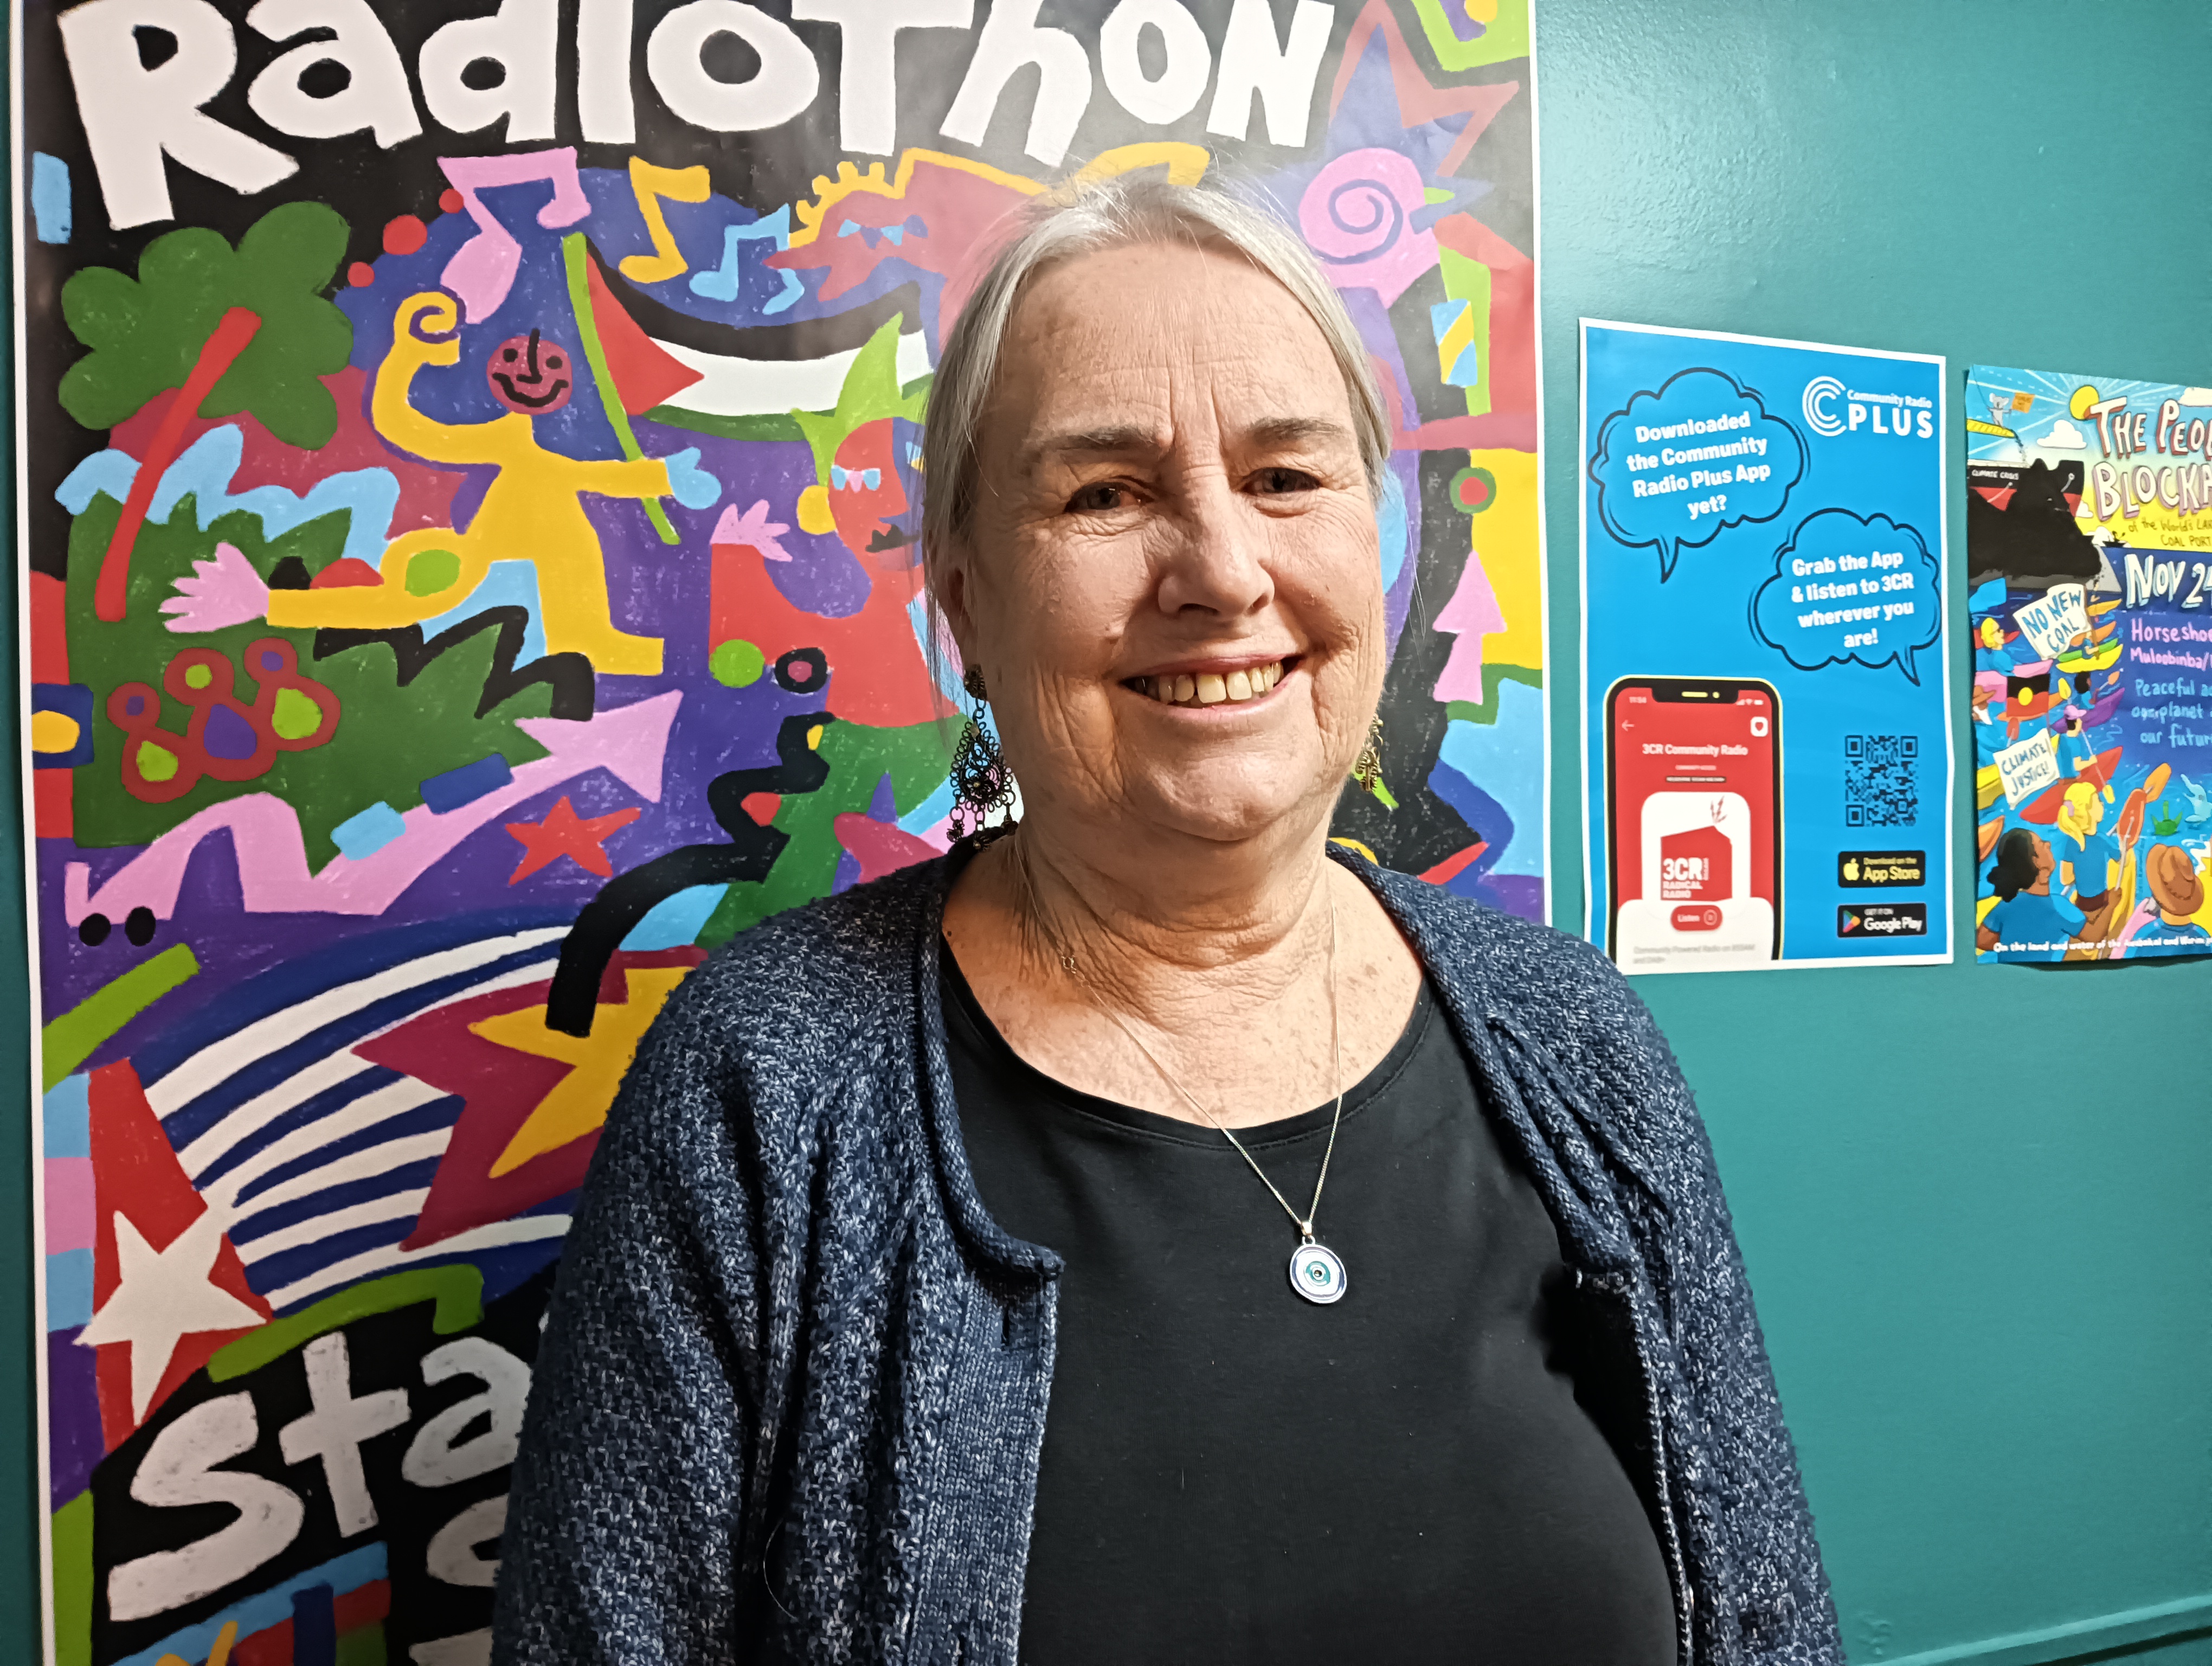 Sue looks towards the viewer wearing a black dress and blue cardigan. She stands in front of this year's colourful 3CR Radiothon poster and smiles 